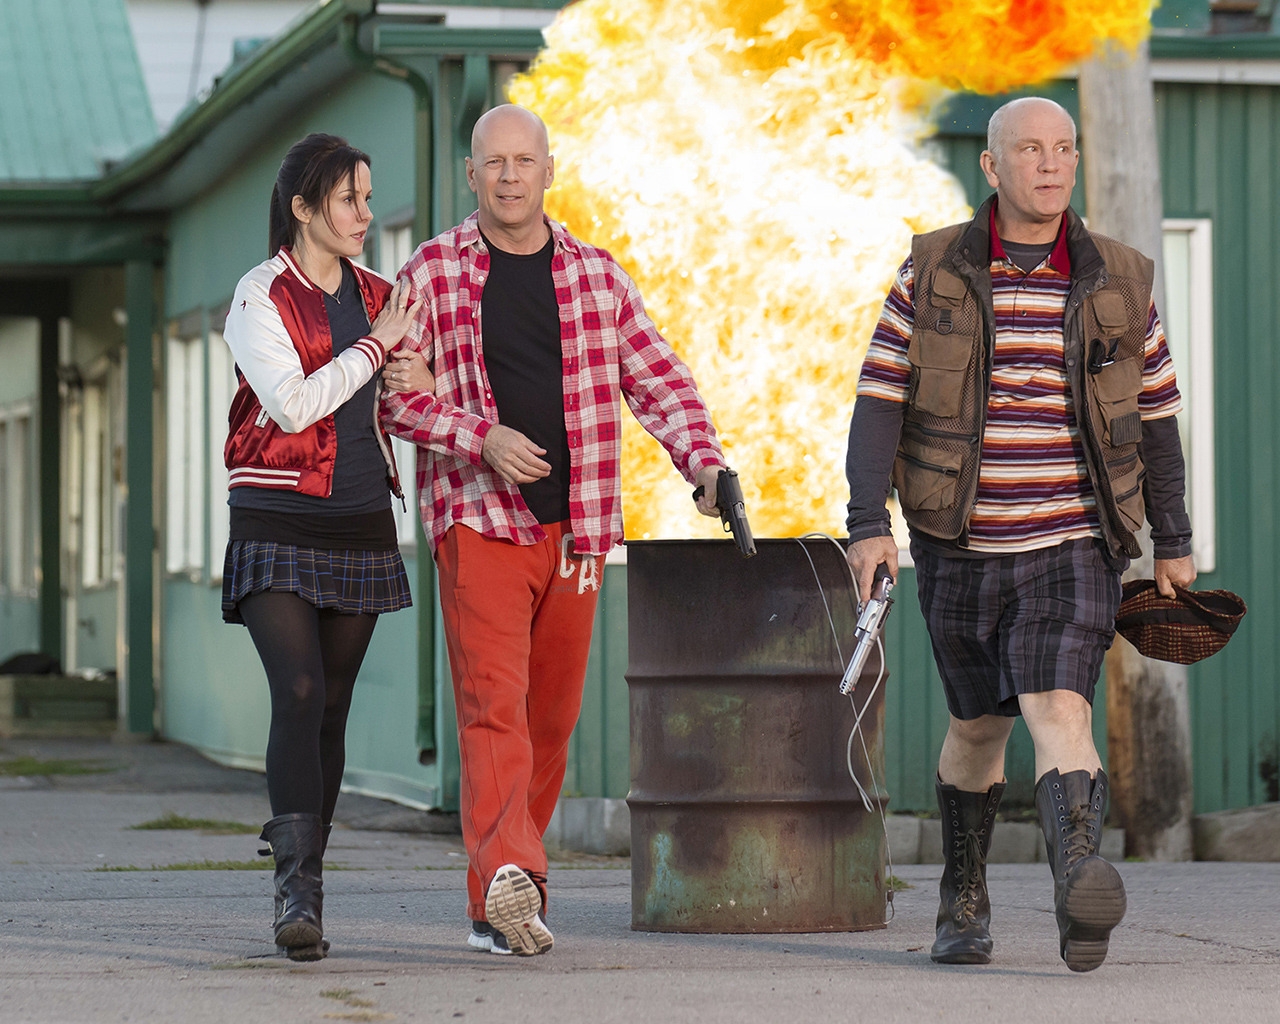 Red 2 Movie 2013 for 1280 x 1024 resolution